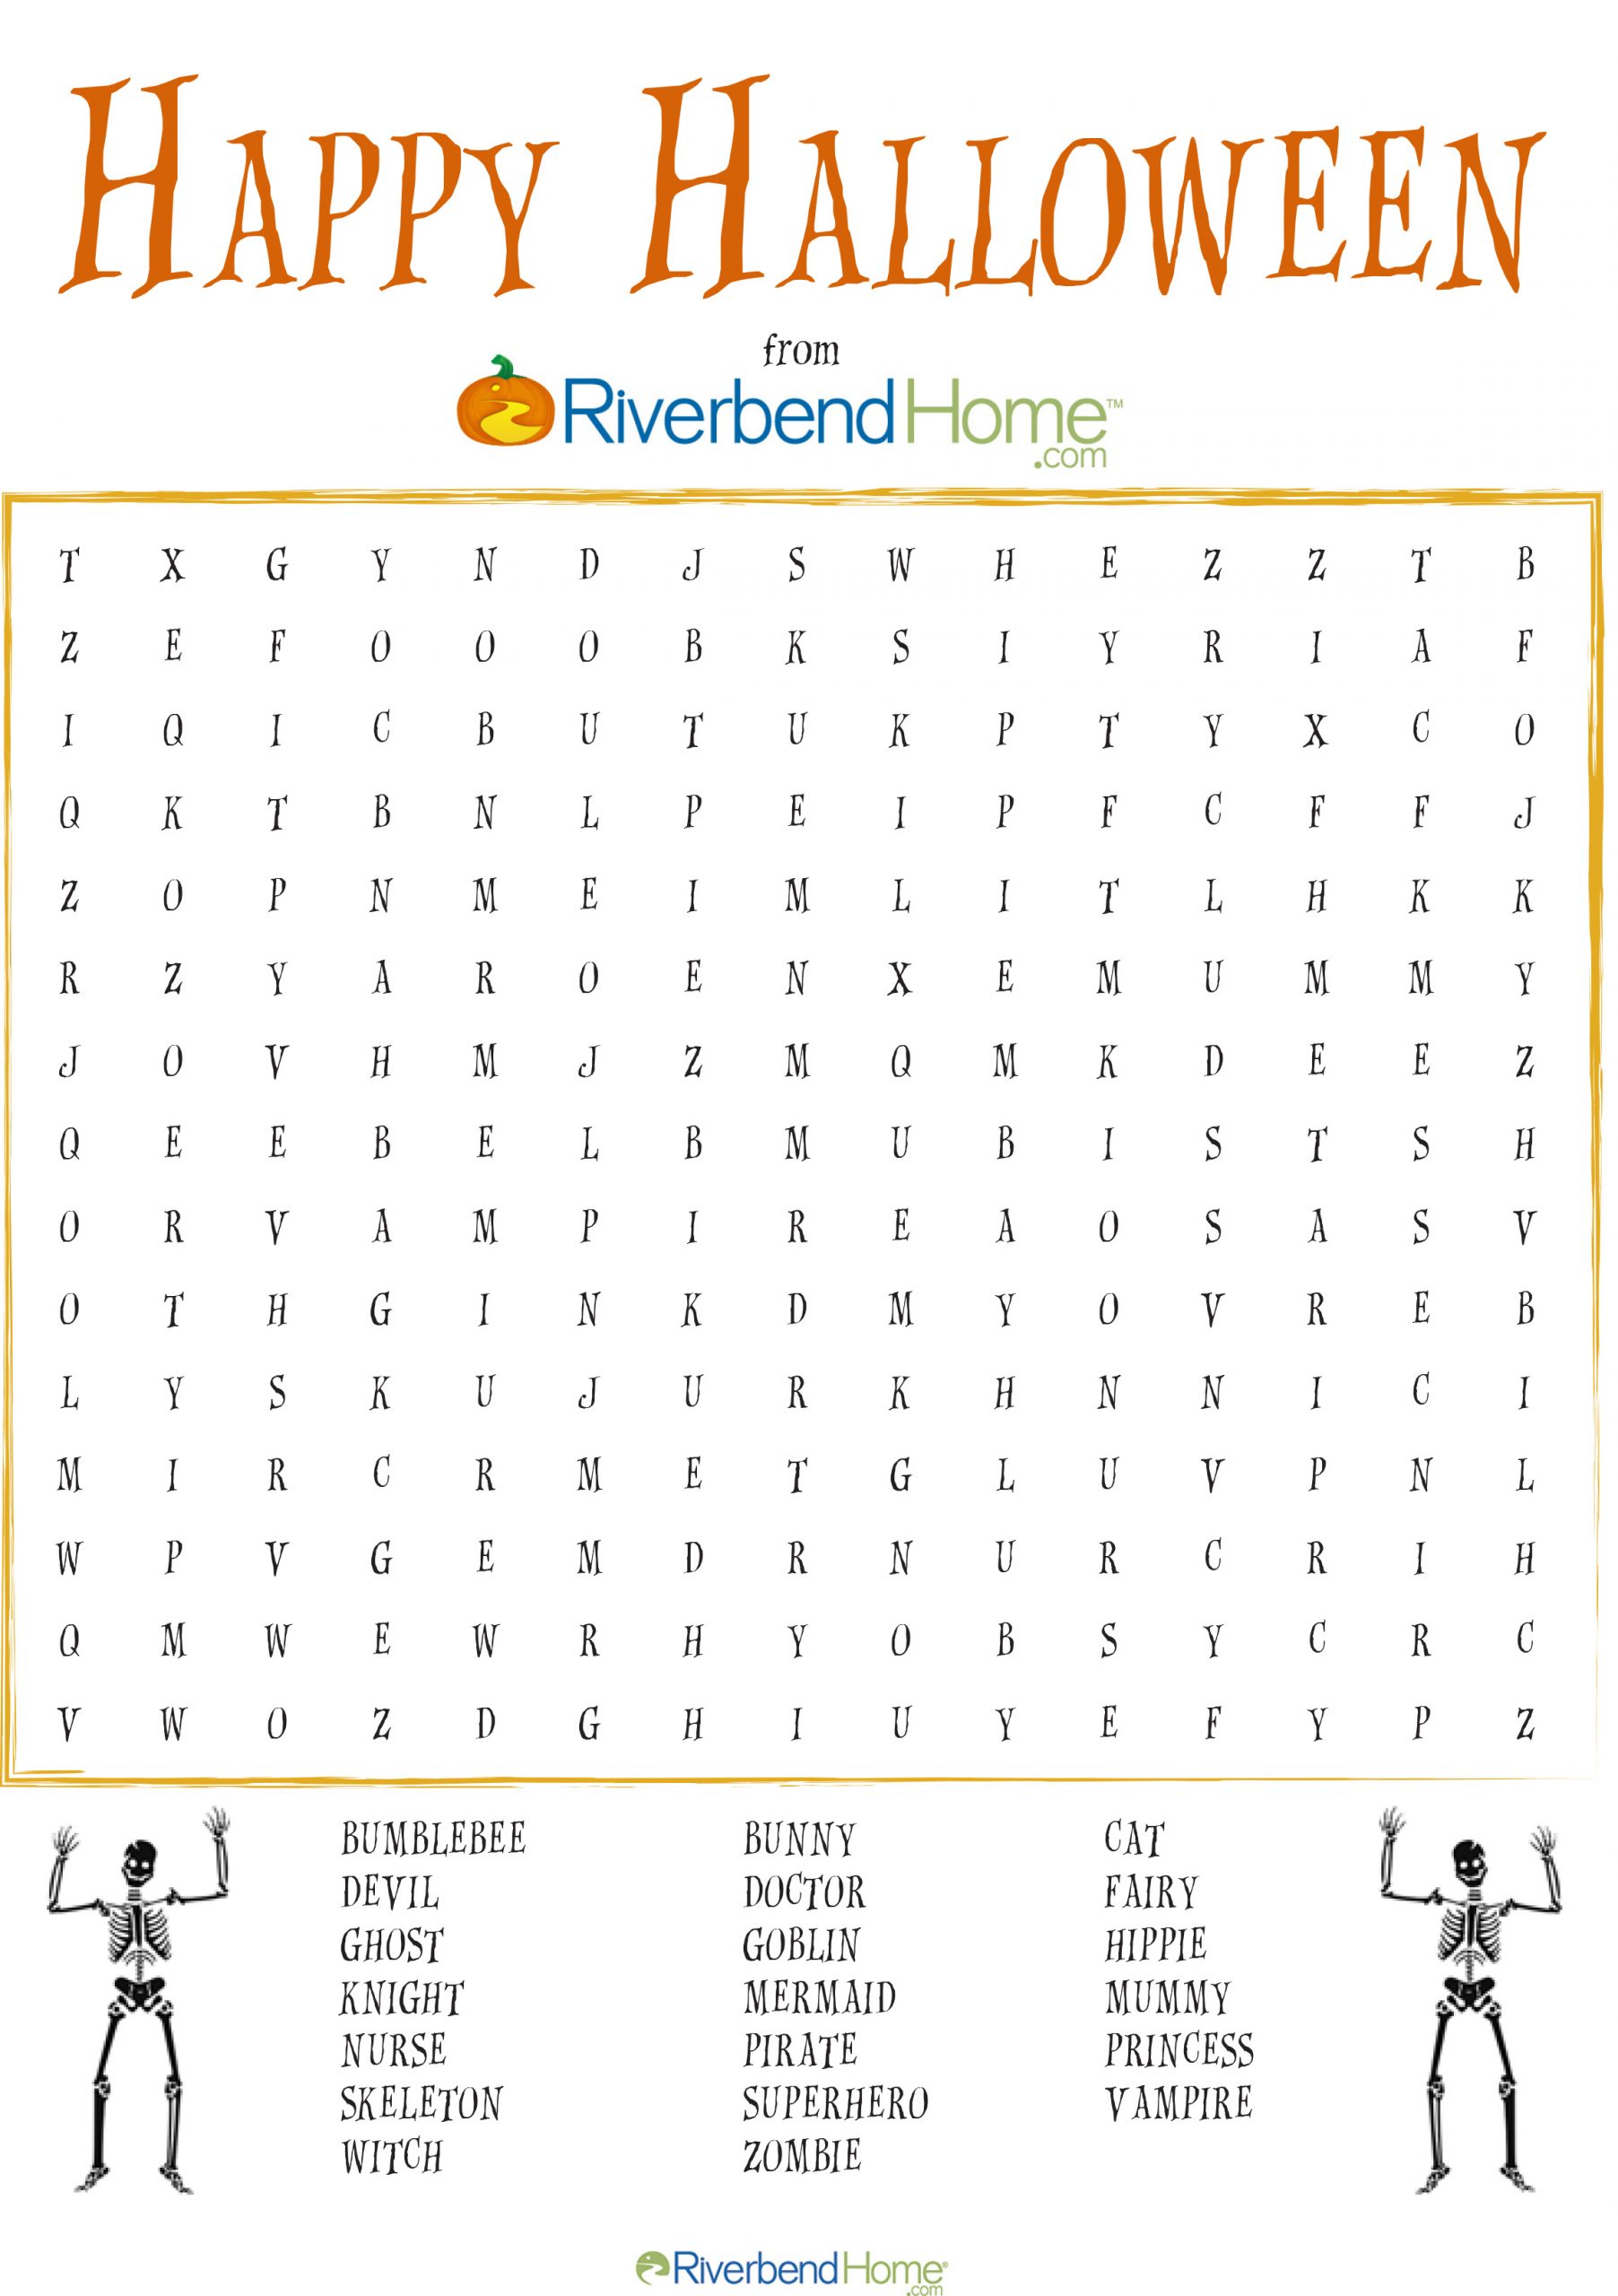 Free Printable Halloween Word Search Puzzle | Riverbend Home